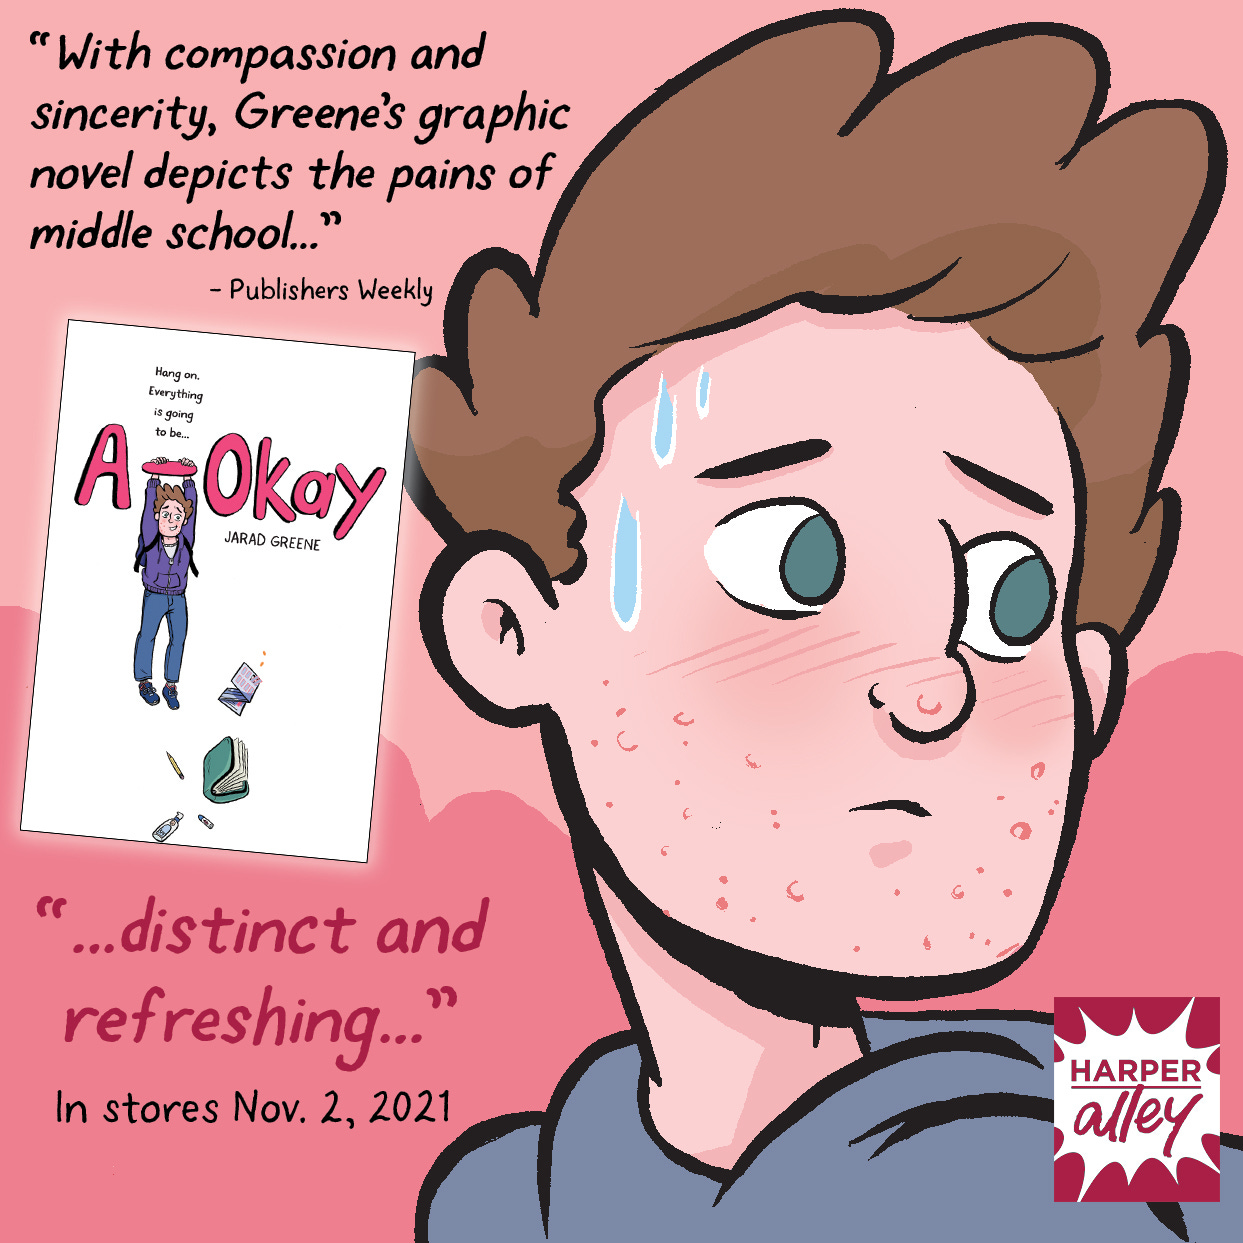 "With compassion and sincerity, Greene’s graphic novel depicts the pains of middle school… distinct and refreshing…" --Publishers Weekly